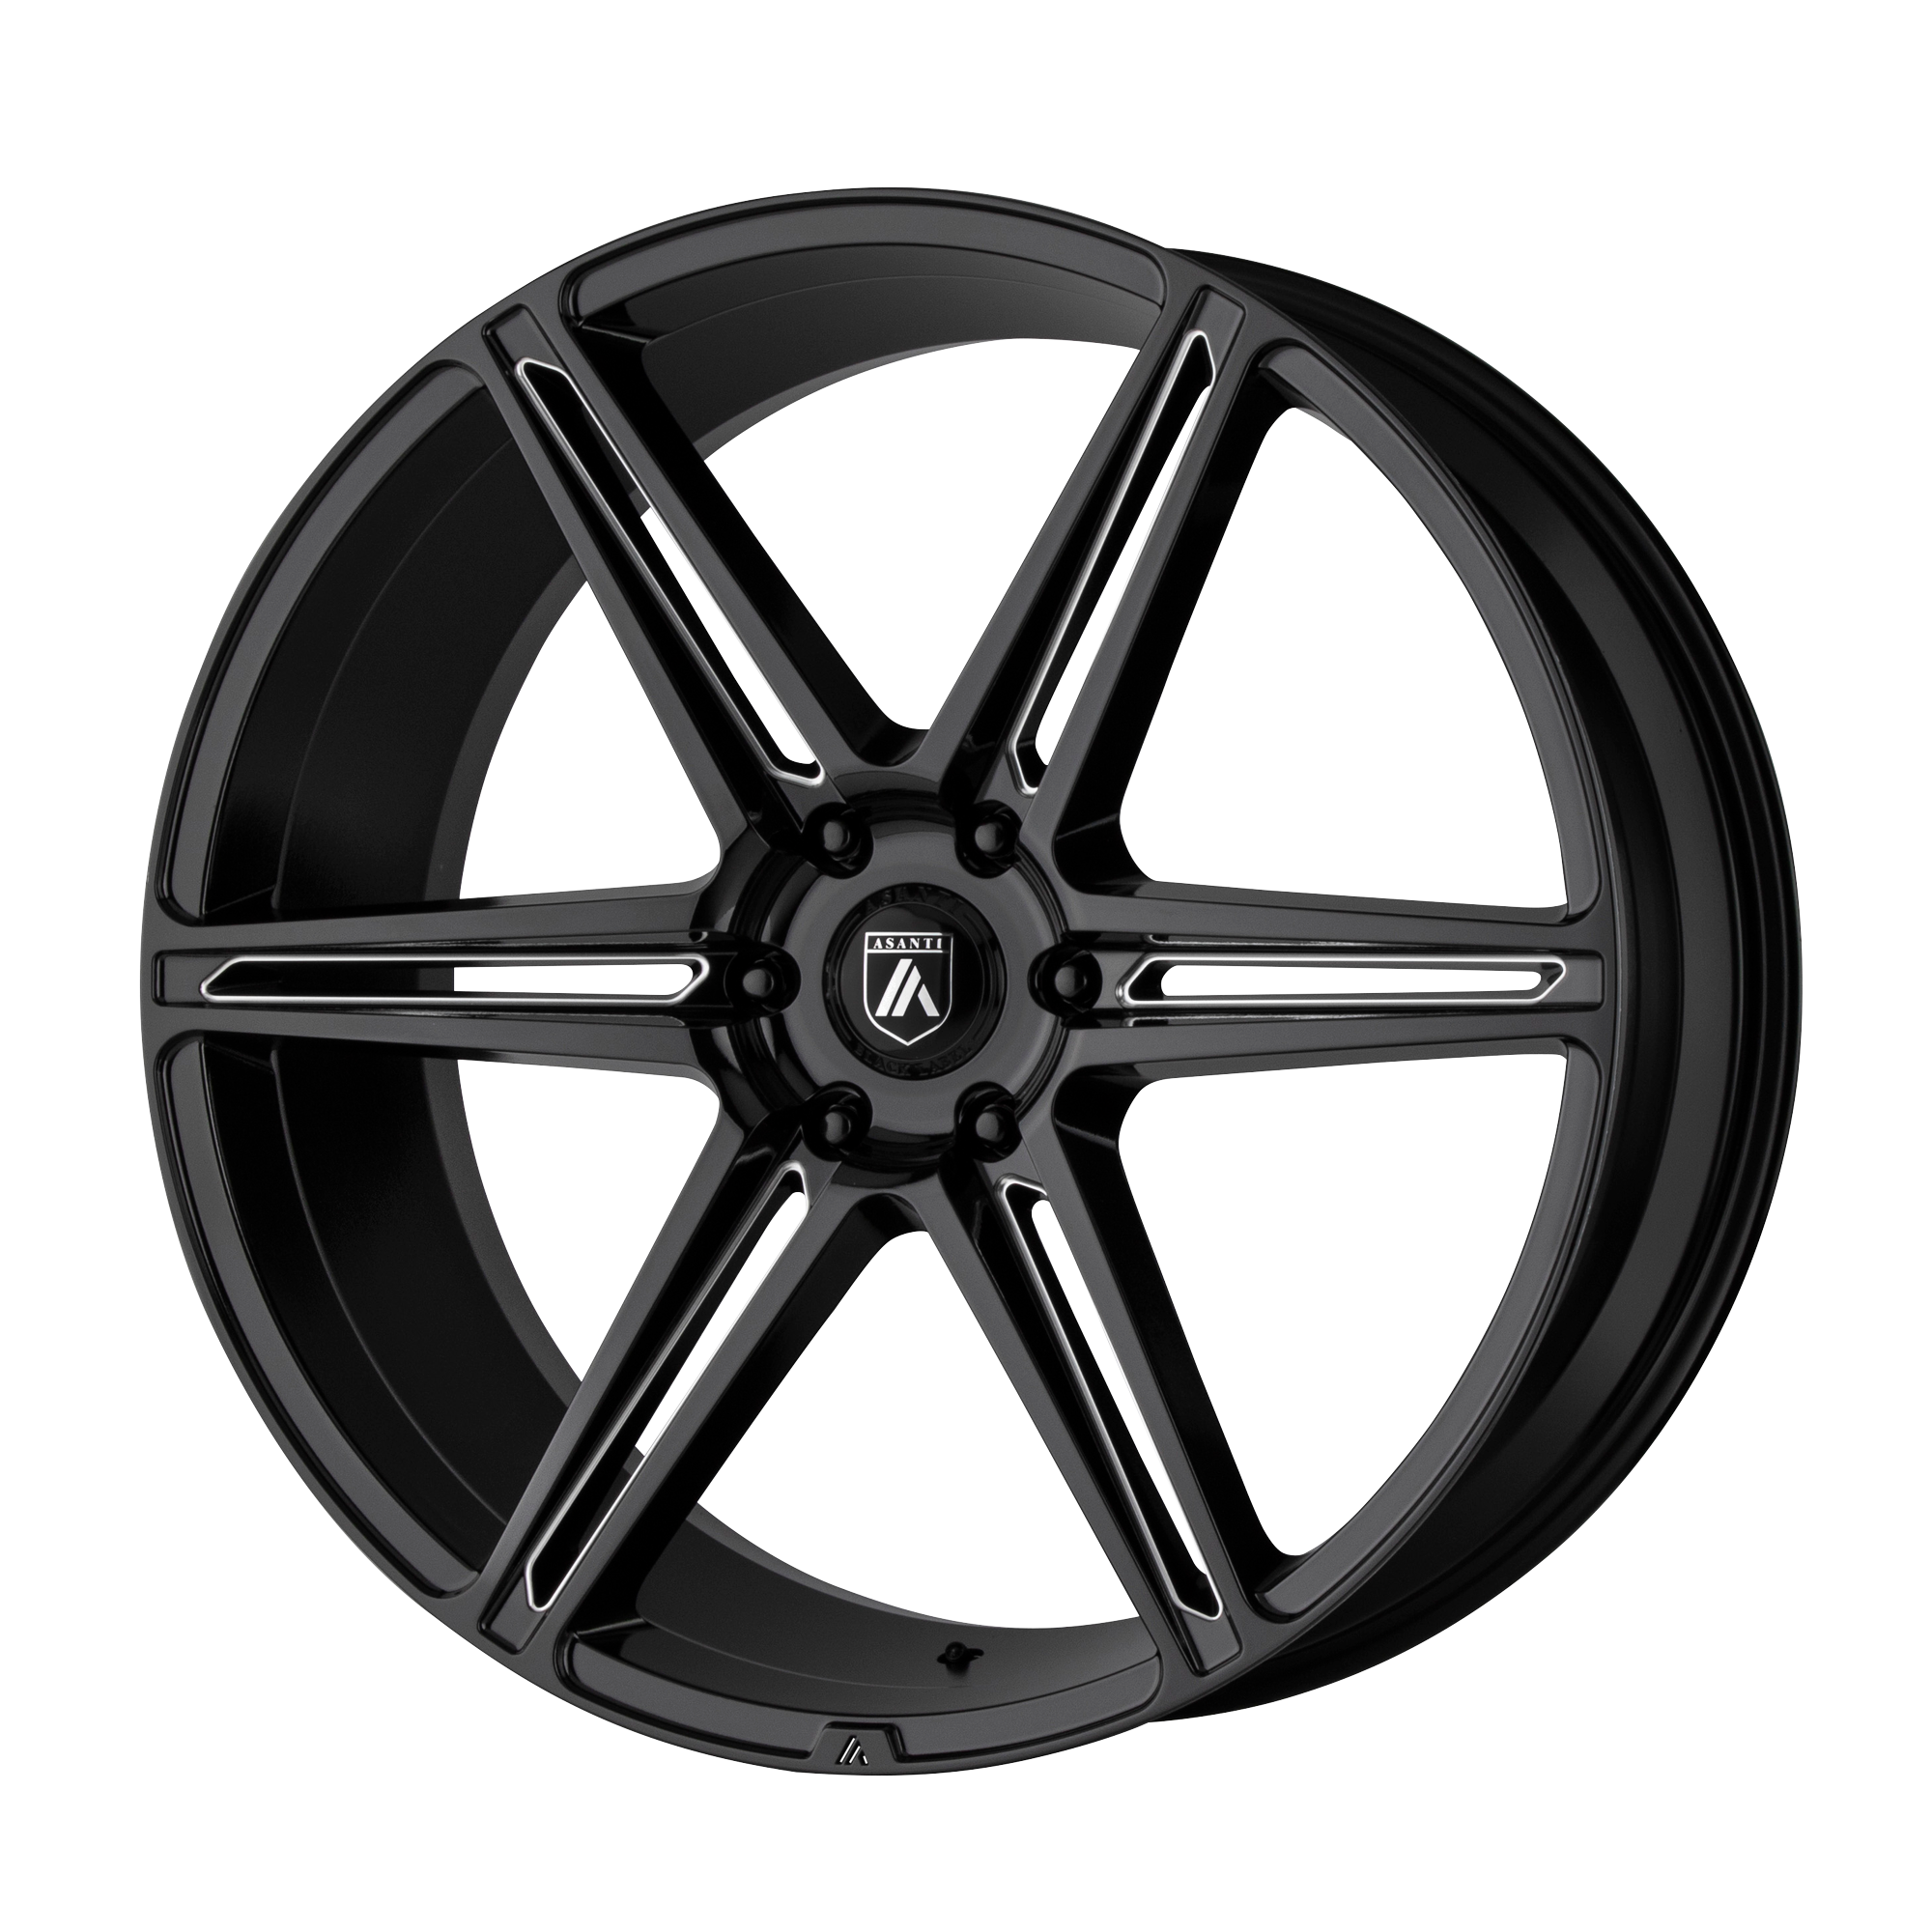 ALPHA 6 20x9 6x135.00 GLOSS BLACK MILLED (30 mm) - Tires and Engine Performance